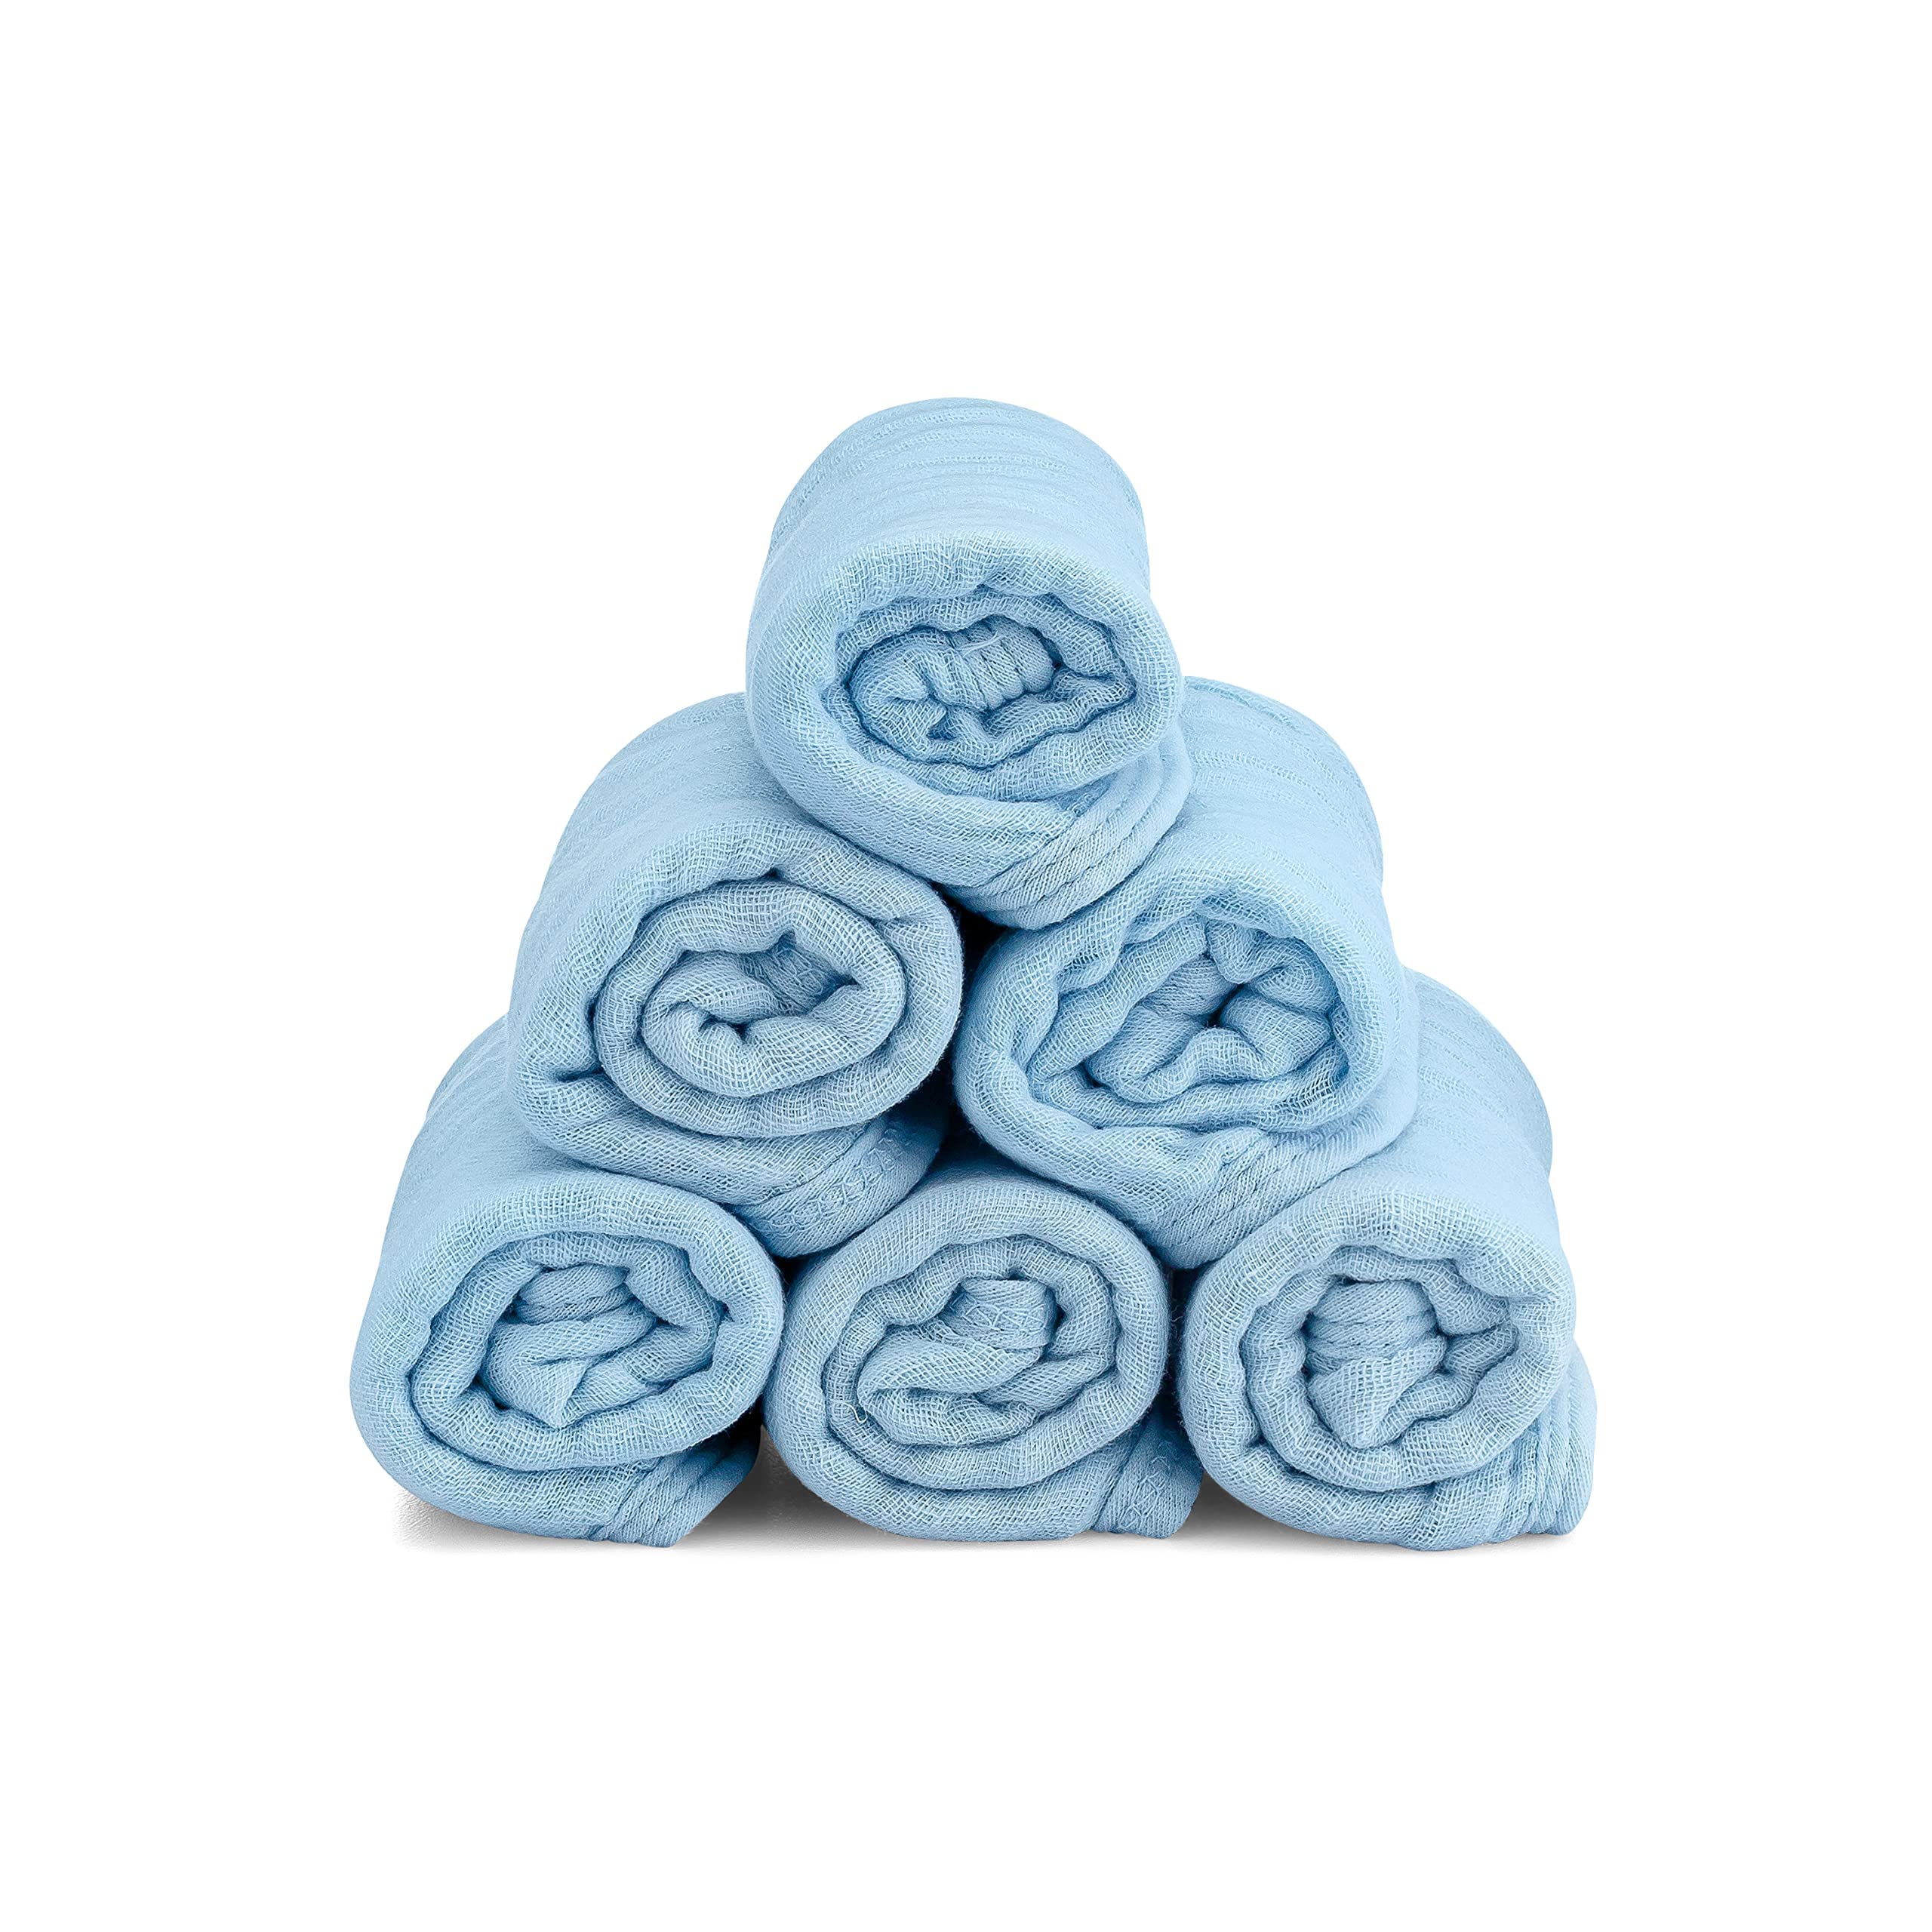 Comfy Cubs Muslin Burp Cloth 6 Pack White and Blue Bundle